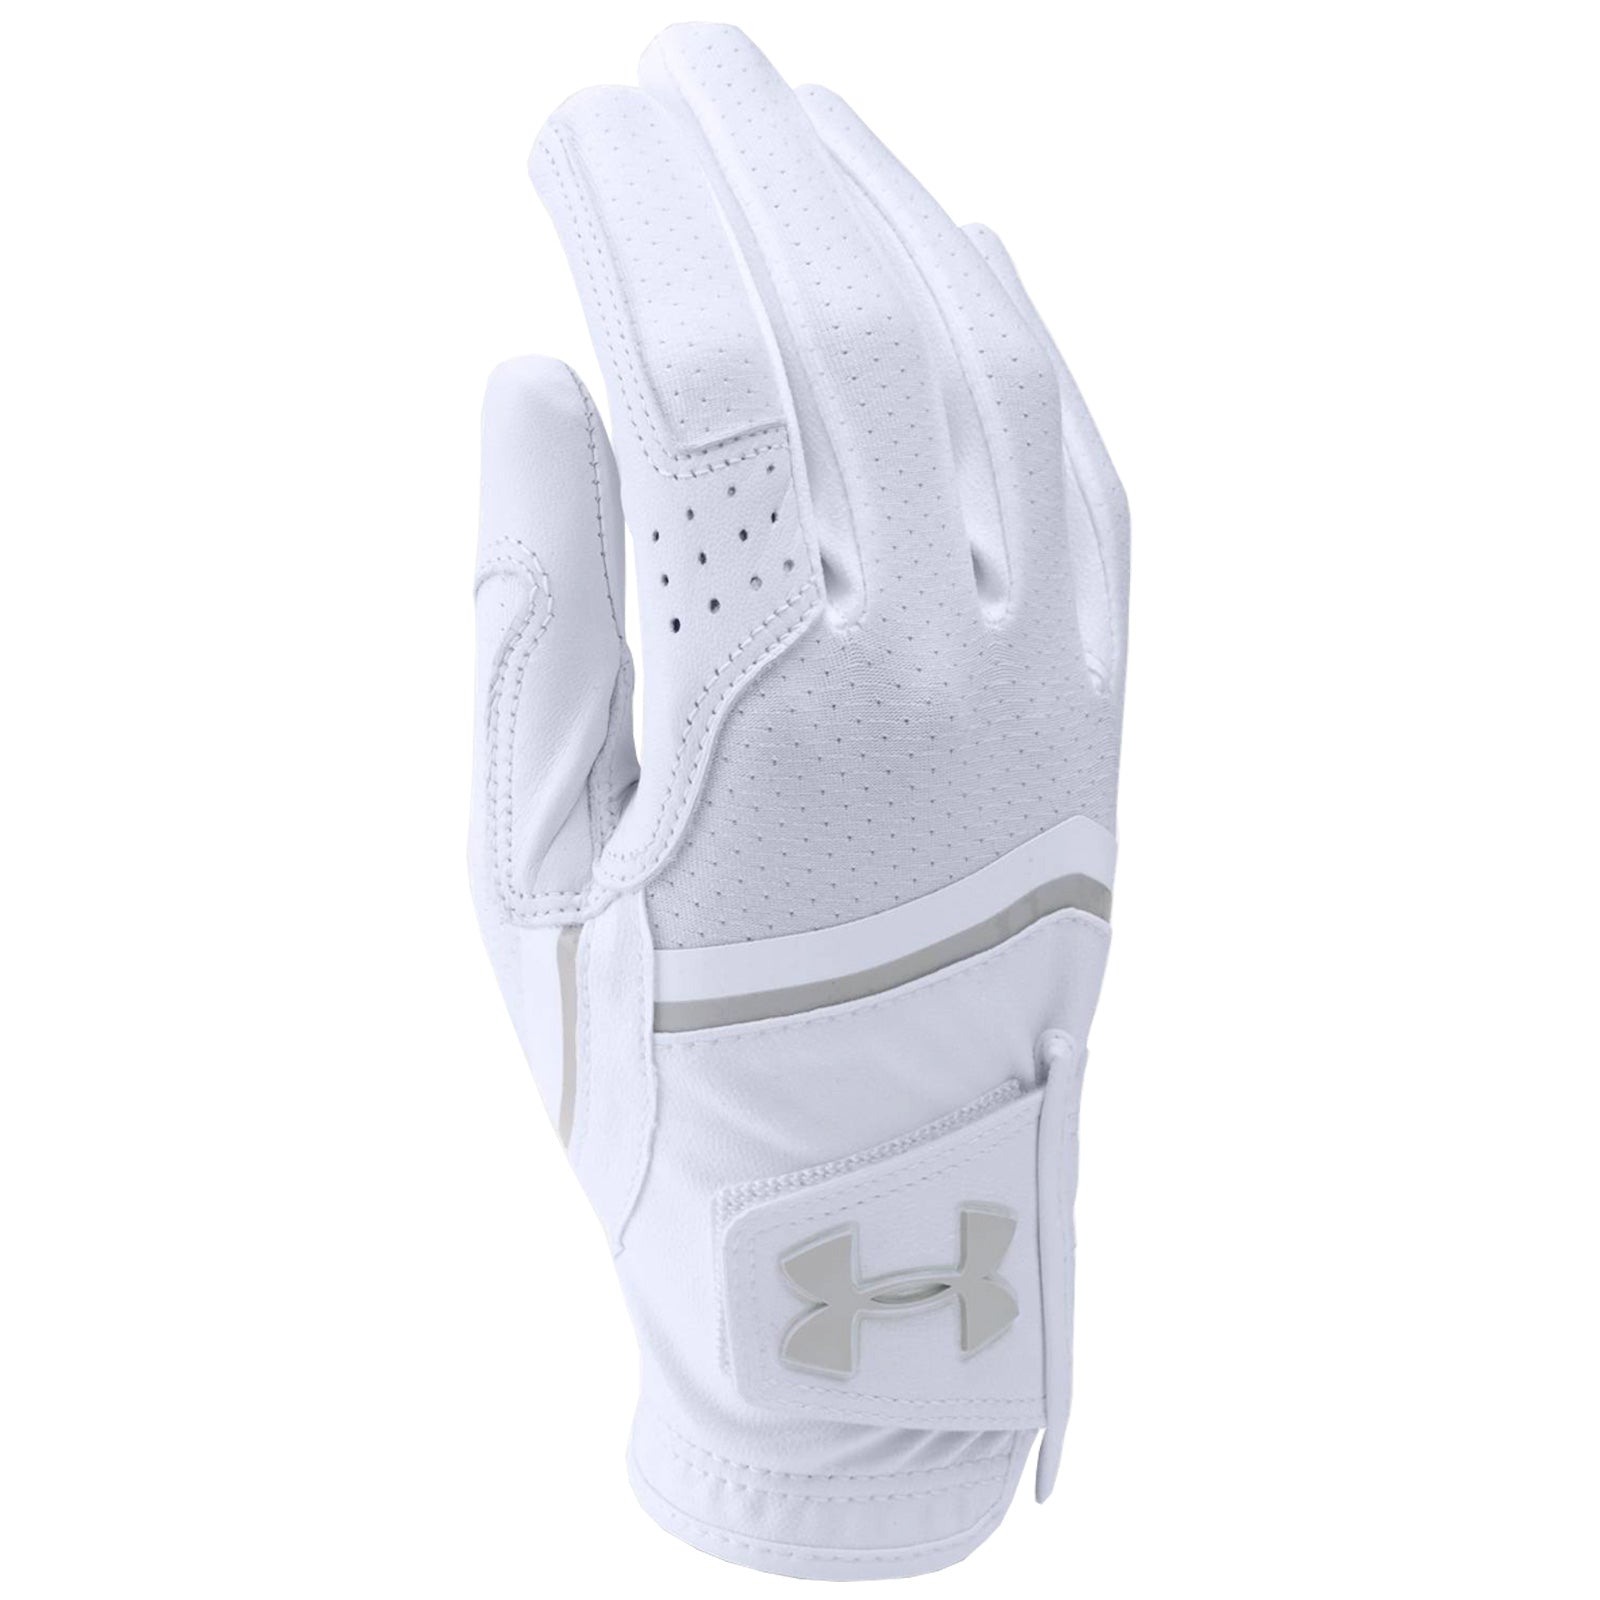 Under Armour Ladies CoolSwitch Right Hand Golf Glove